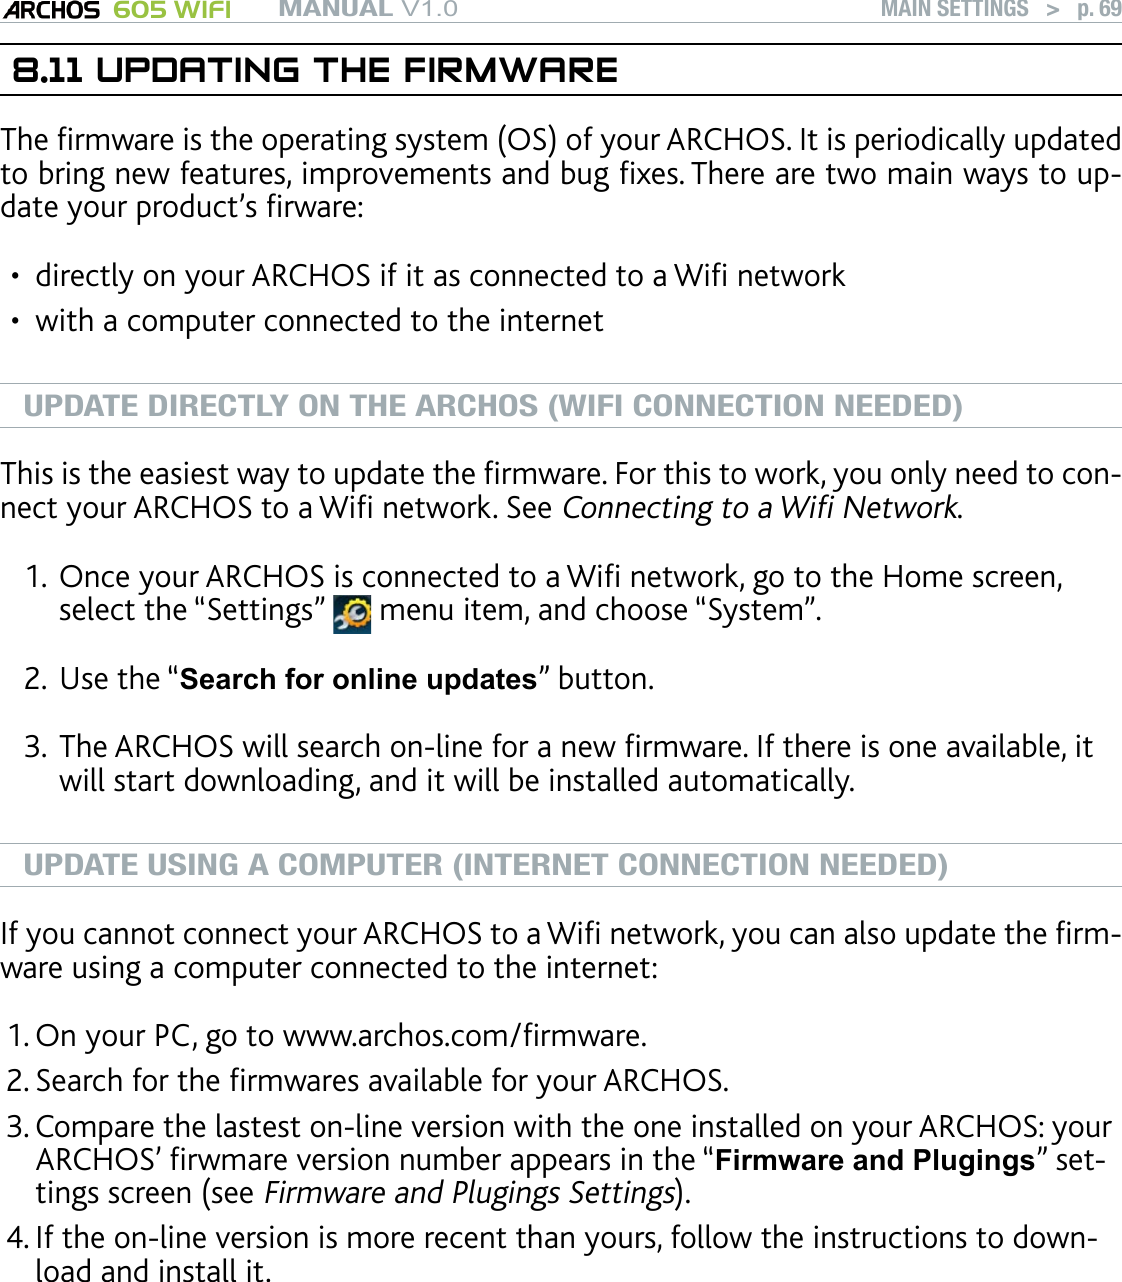 MANUAL V1.0 605 WIFI MAIN SETTINGS   &gt;   p. 698.11 UPDATING THE FIRMWAREThe rmware is the operating system (OS) of your ARCHOS. It is periodically updated to bring new features, improvements and bug xes. There are two main ways to up-date your product’s rware:directly on your ARCHOS if it as connected to a Wi networkwith a computer connected to the internetUPDATE DIRECTLY ON THE ARCHOS (WIFI CONNECTION NEEDED)This is the easiest way to update the rmware. For this to work, you only need to con-nect your ARCHOS to a Wi network. See Connecting to a Wi Network.Once your ARCHOS is connected to a Wi network, go to the Home screen, select the “Settings”   menu item, and choose “System”.Use the “Search for online updates” button. The ARCHOS will search on-line for a new rmware. If there is one available, it will start downloading, and it will be installed automatically. UPDATE USING A COMPUTER (INTERNET CONNECTION NEEDED)If you cannot connect your ARCHOS to a Wi network, you can also update the rm-ware using a computer connected to the internet:On your PC, go to www.archos.com/rmware.Search for the rmwares available for your ARCHOS. Compare the lastest on-line version with the one installed on your ARCHOS: your ARCHOS’ rwmare version number appears in the “Firmware and Plugings” set-tings screen (see Firmware and Plugings Settings).If the on-line version is more recent than yours, follow the instructions to down-load and install it. Your Internet browser may warn you that the contents of the rmware le may harm your computer. Ignore this message.••1.2.3.1.2.3.4.